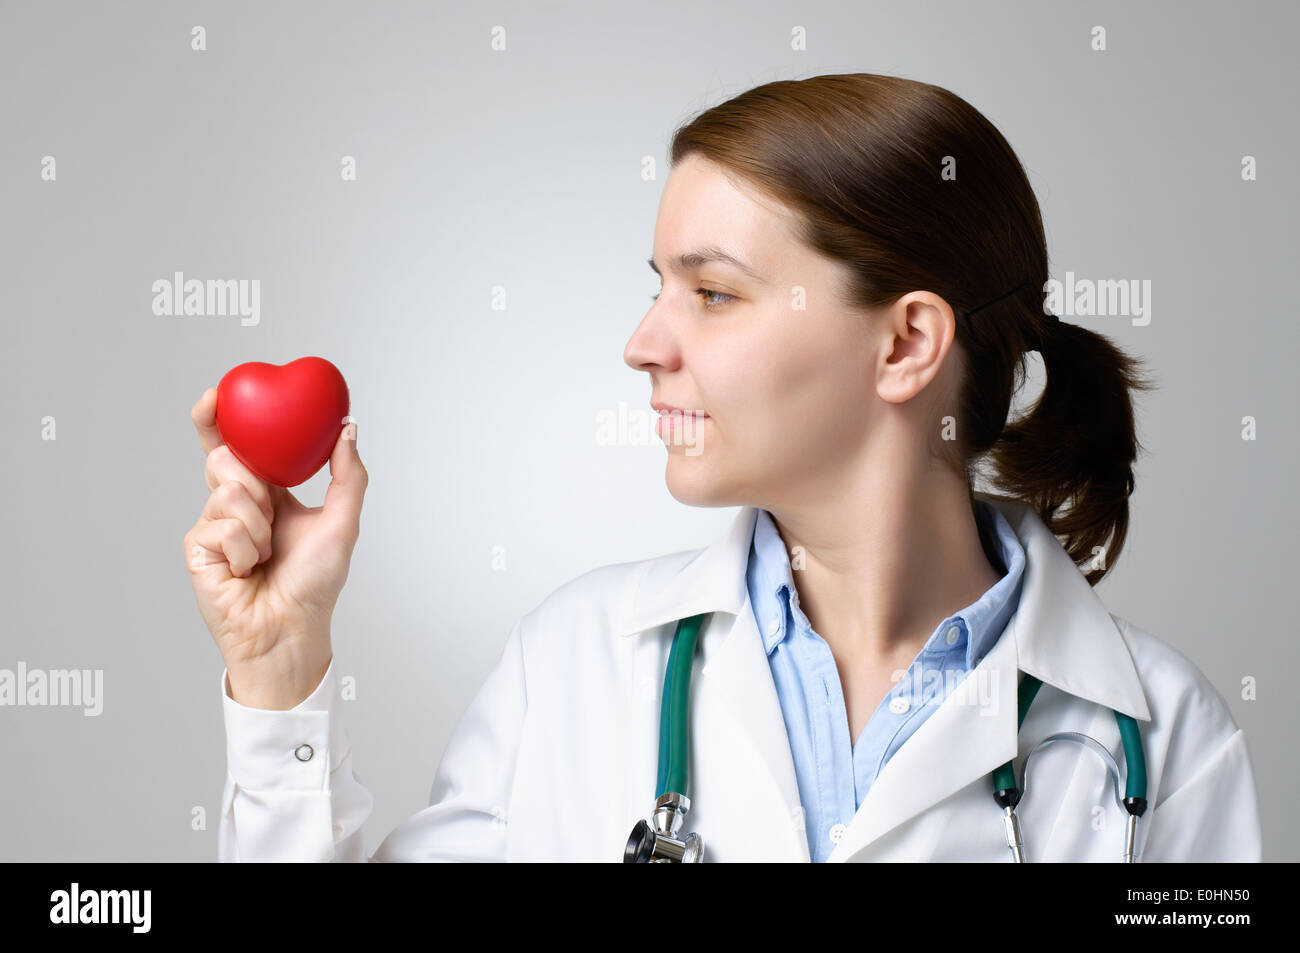 Red heart shape in the hand of a doctor Stock Photo